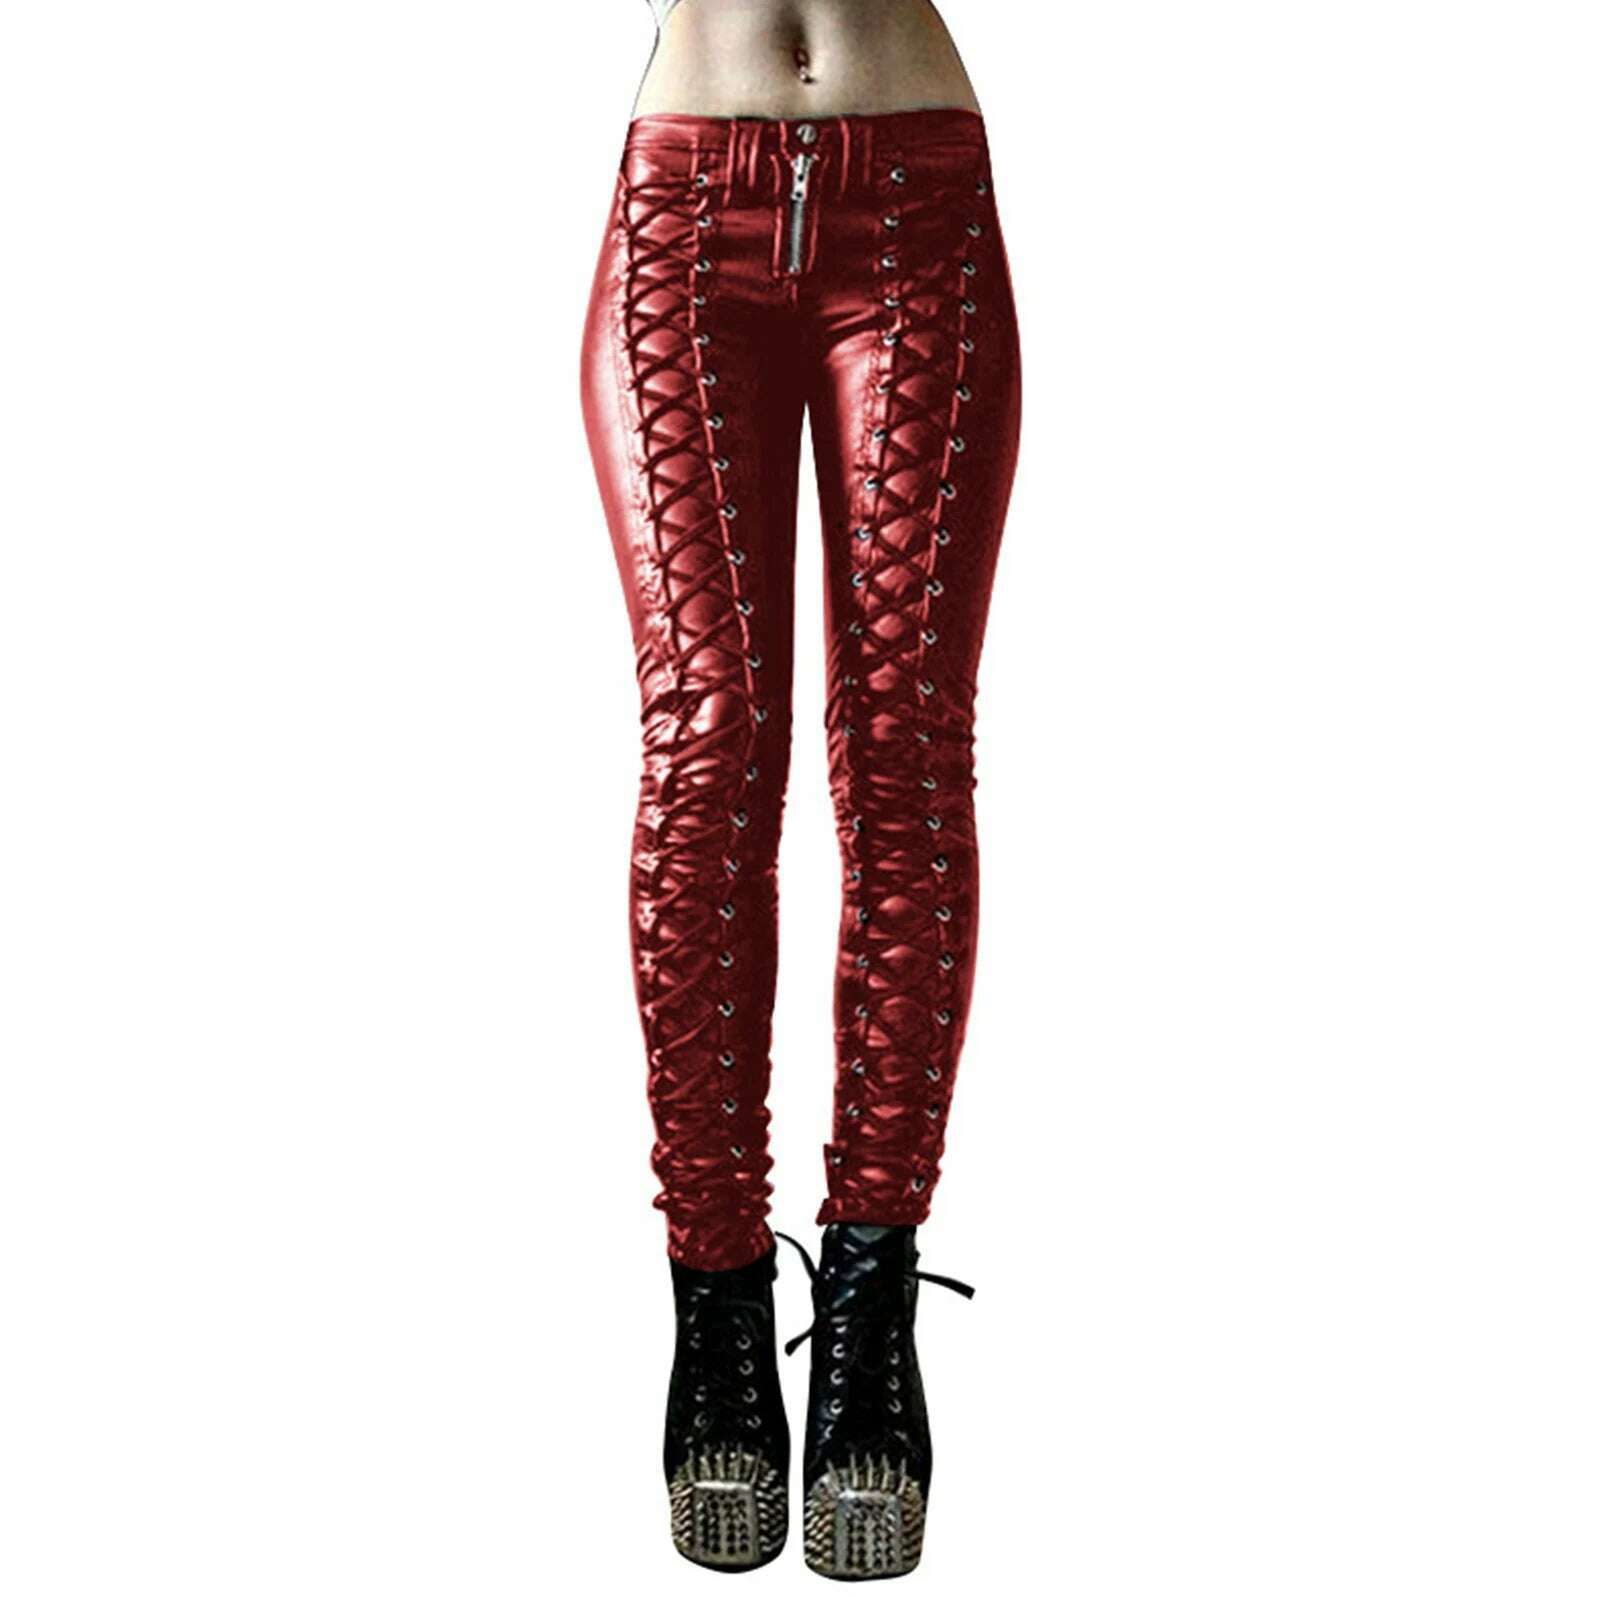 KIMLUD, Women Retro PU Pants Leather steampunk Rivet Zipper Lace up Pencil pants Medieval Gothic Skinny Streetwear Autumn Casual Trouse, Red1 / S, KIMLUD Women's Clothes